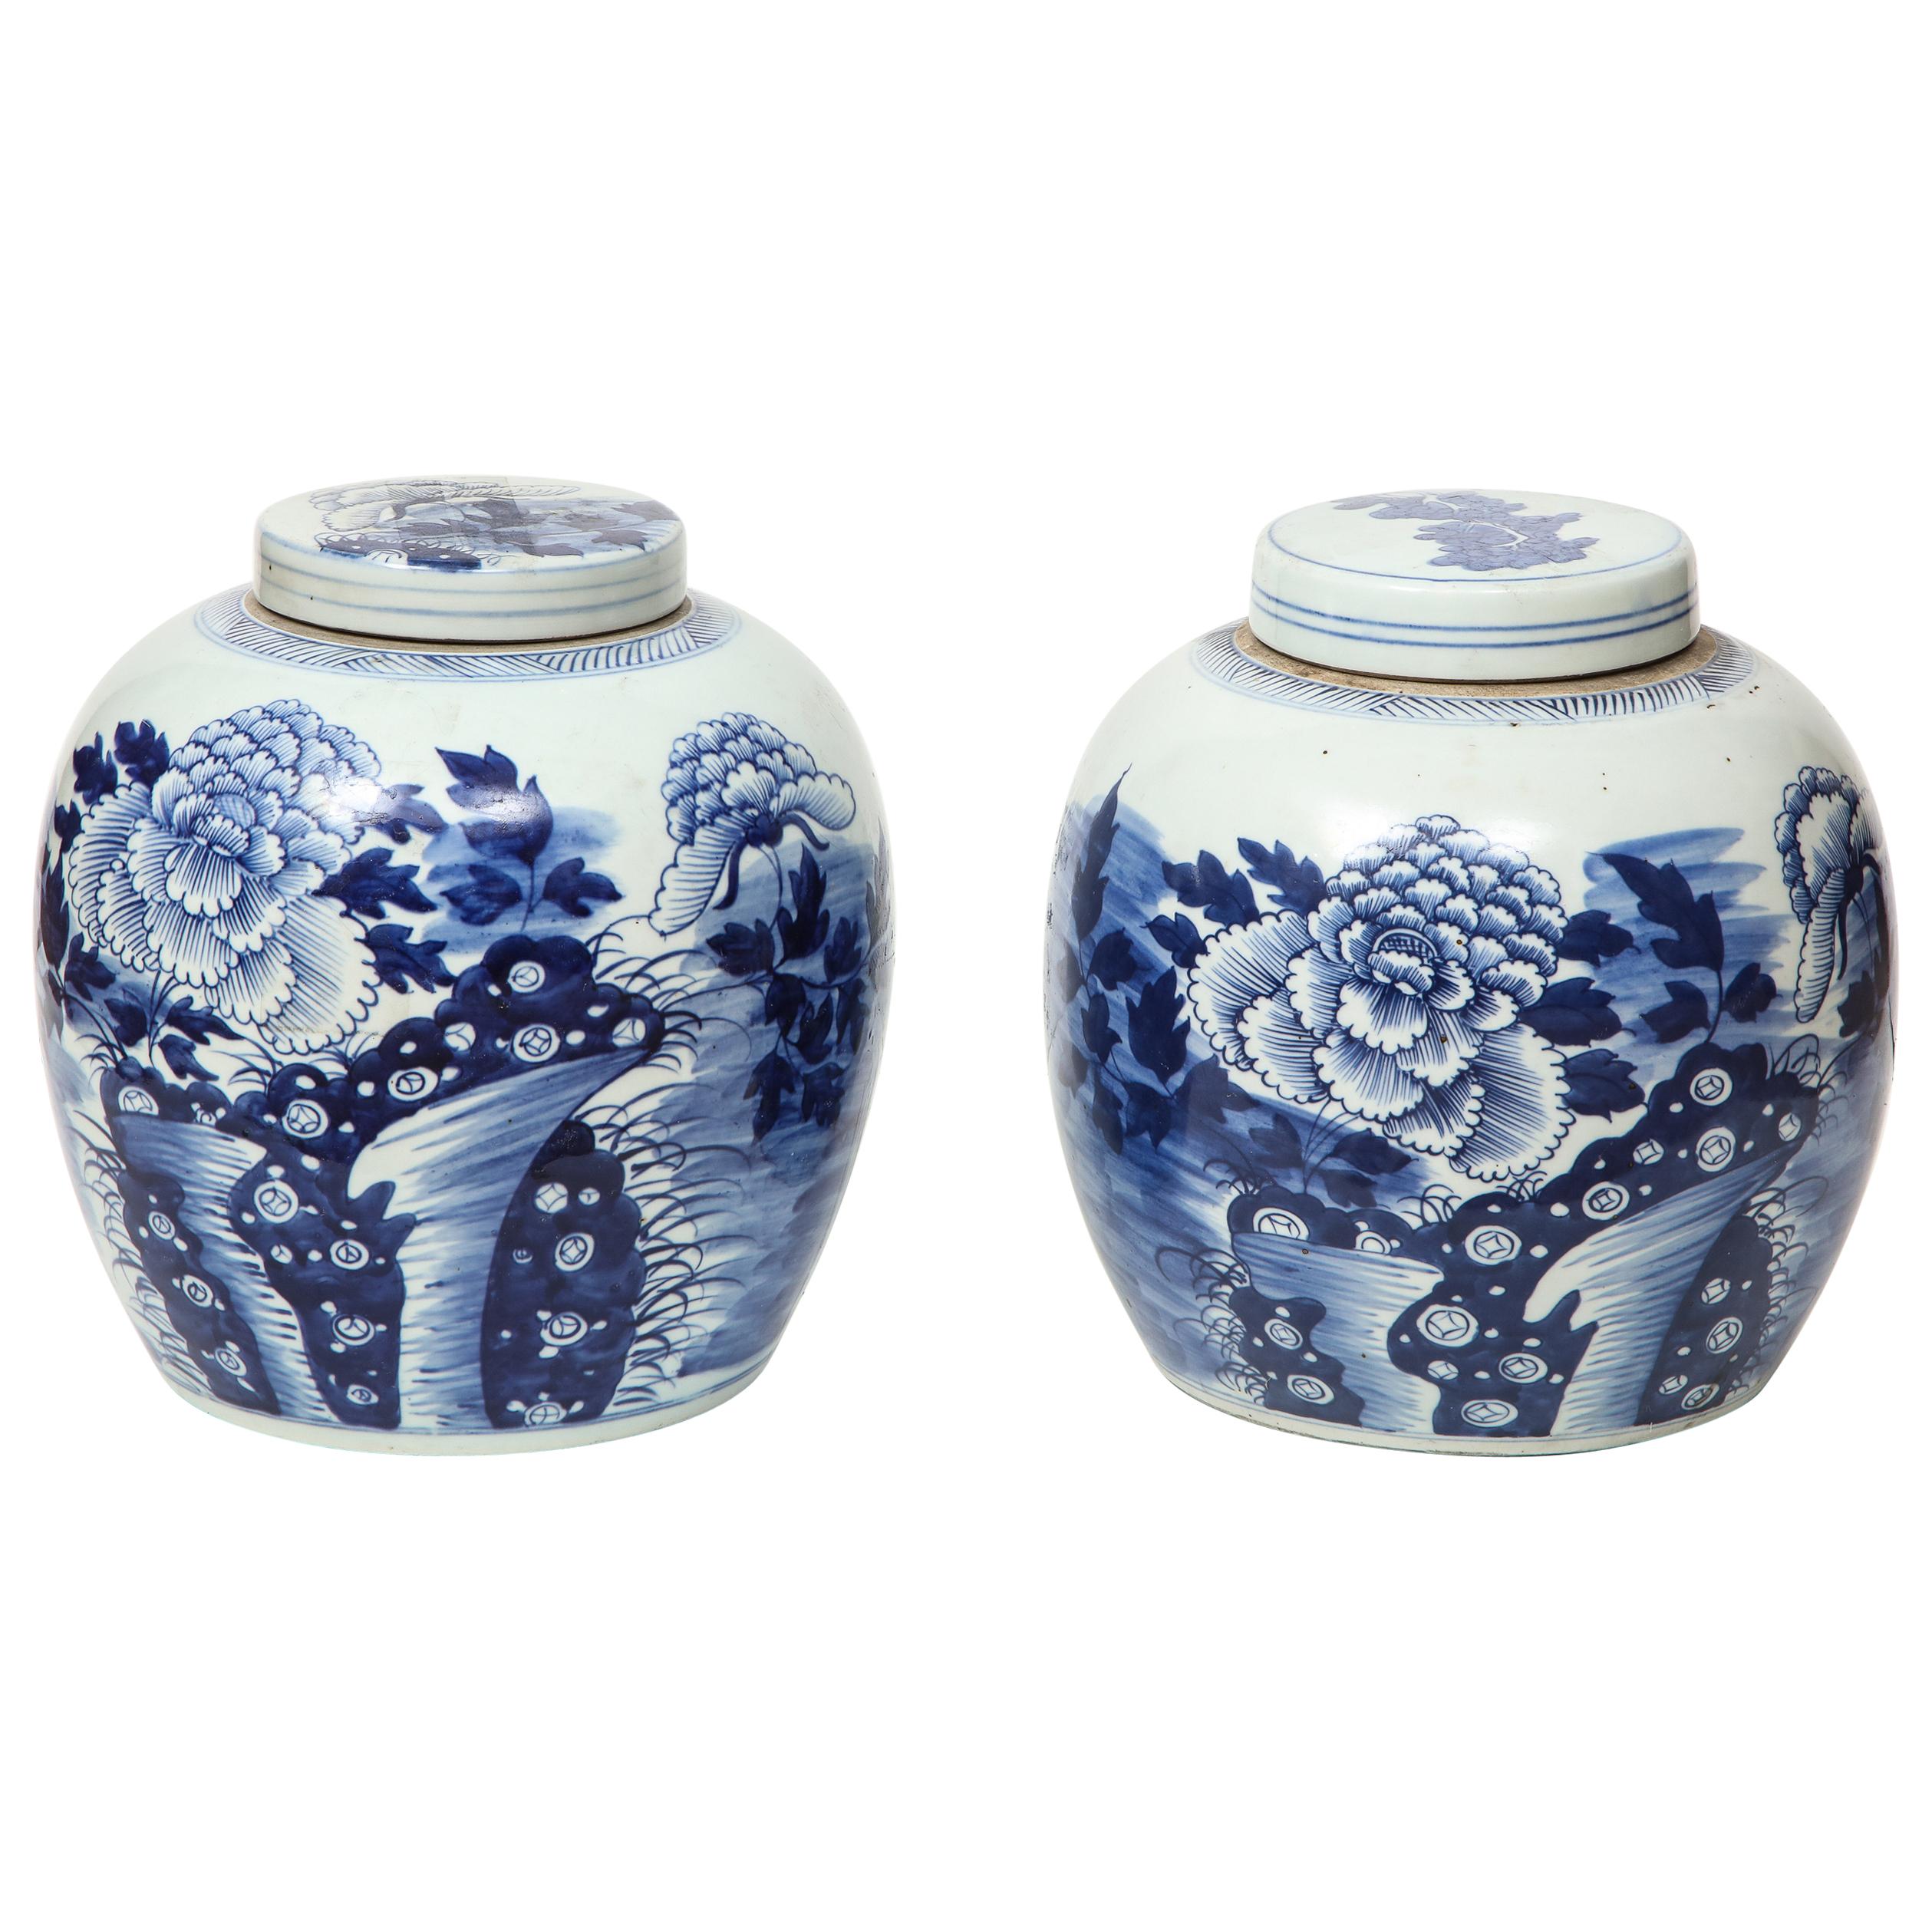 Pair of Chinese Export Ginger Jars